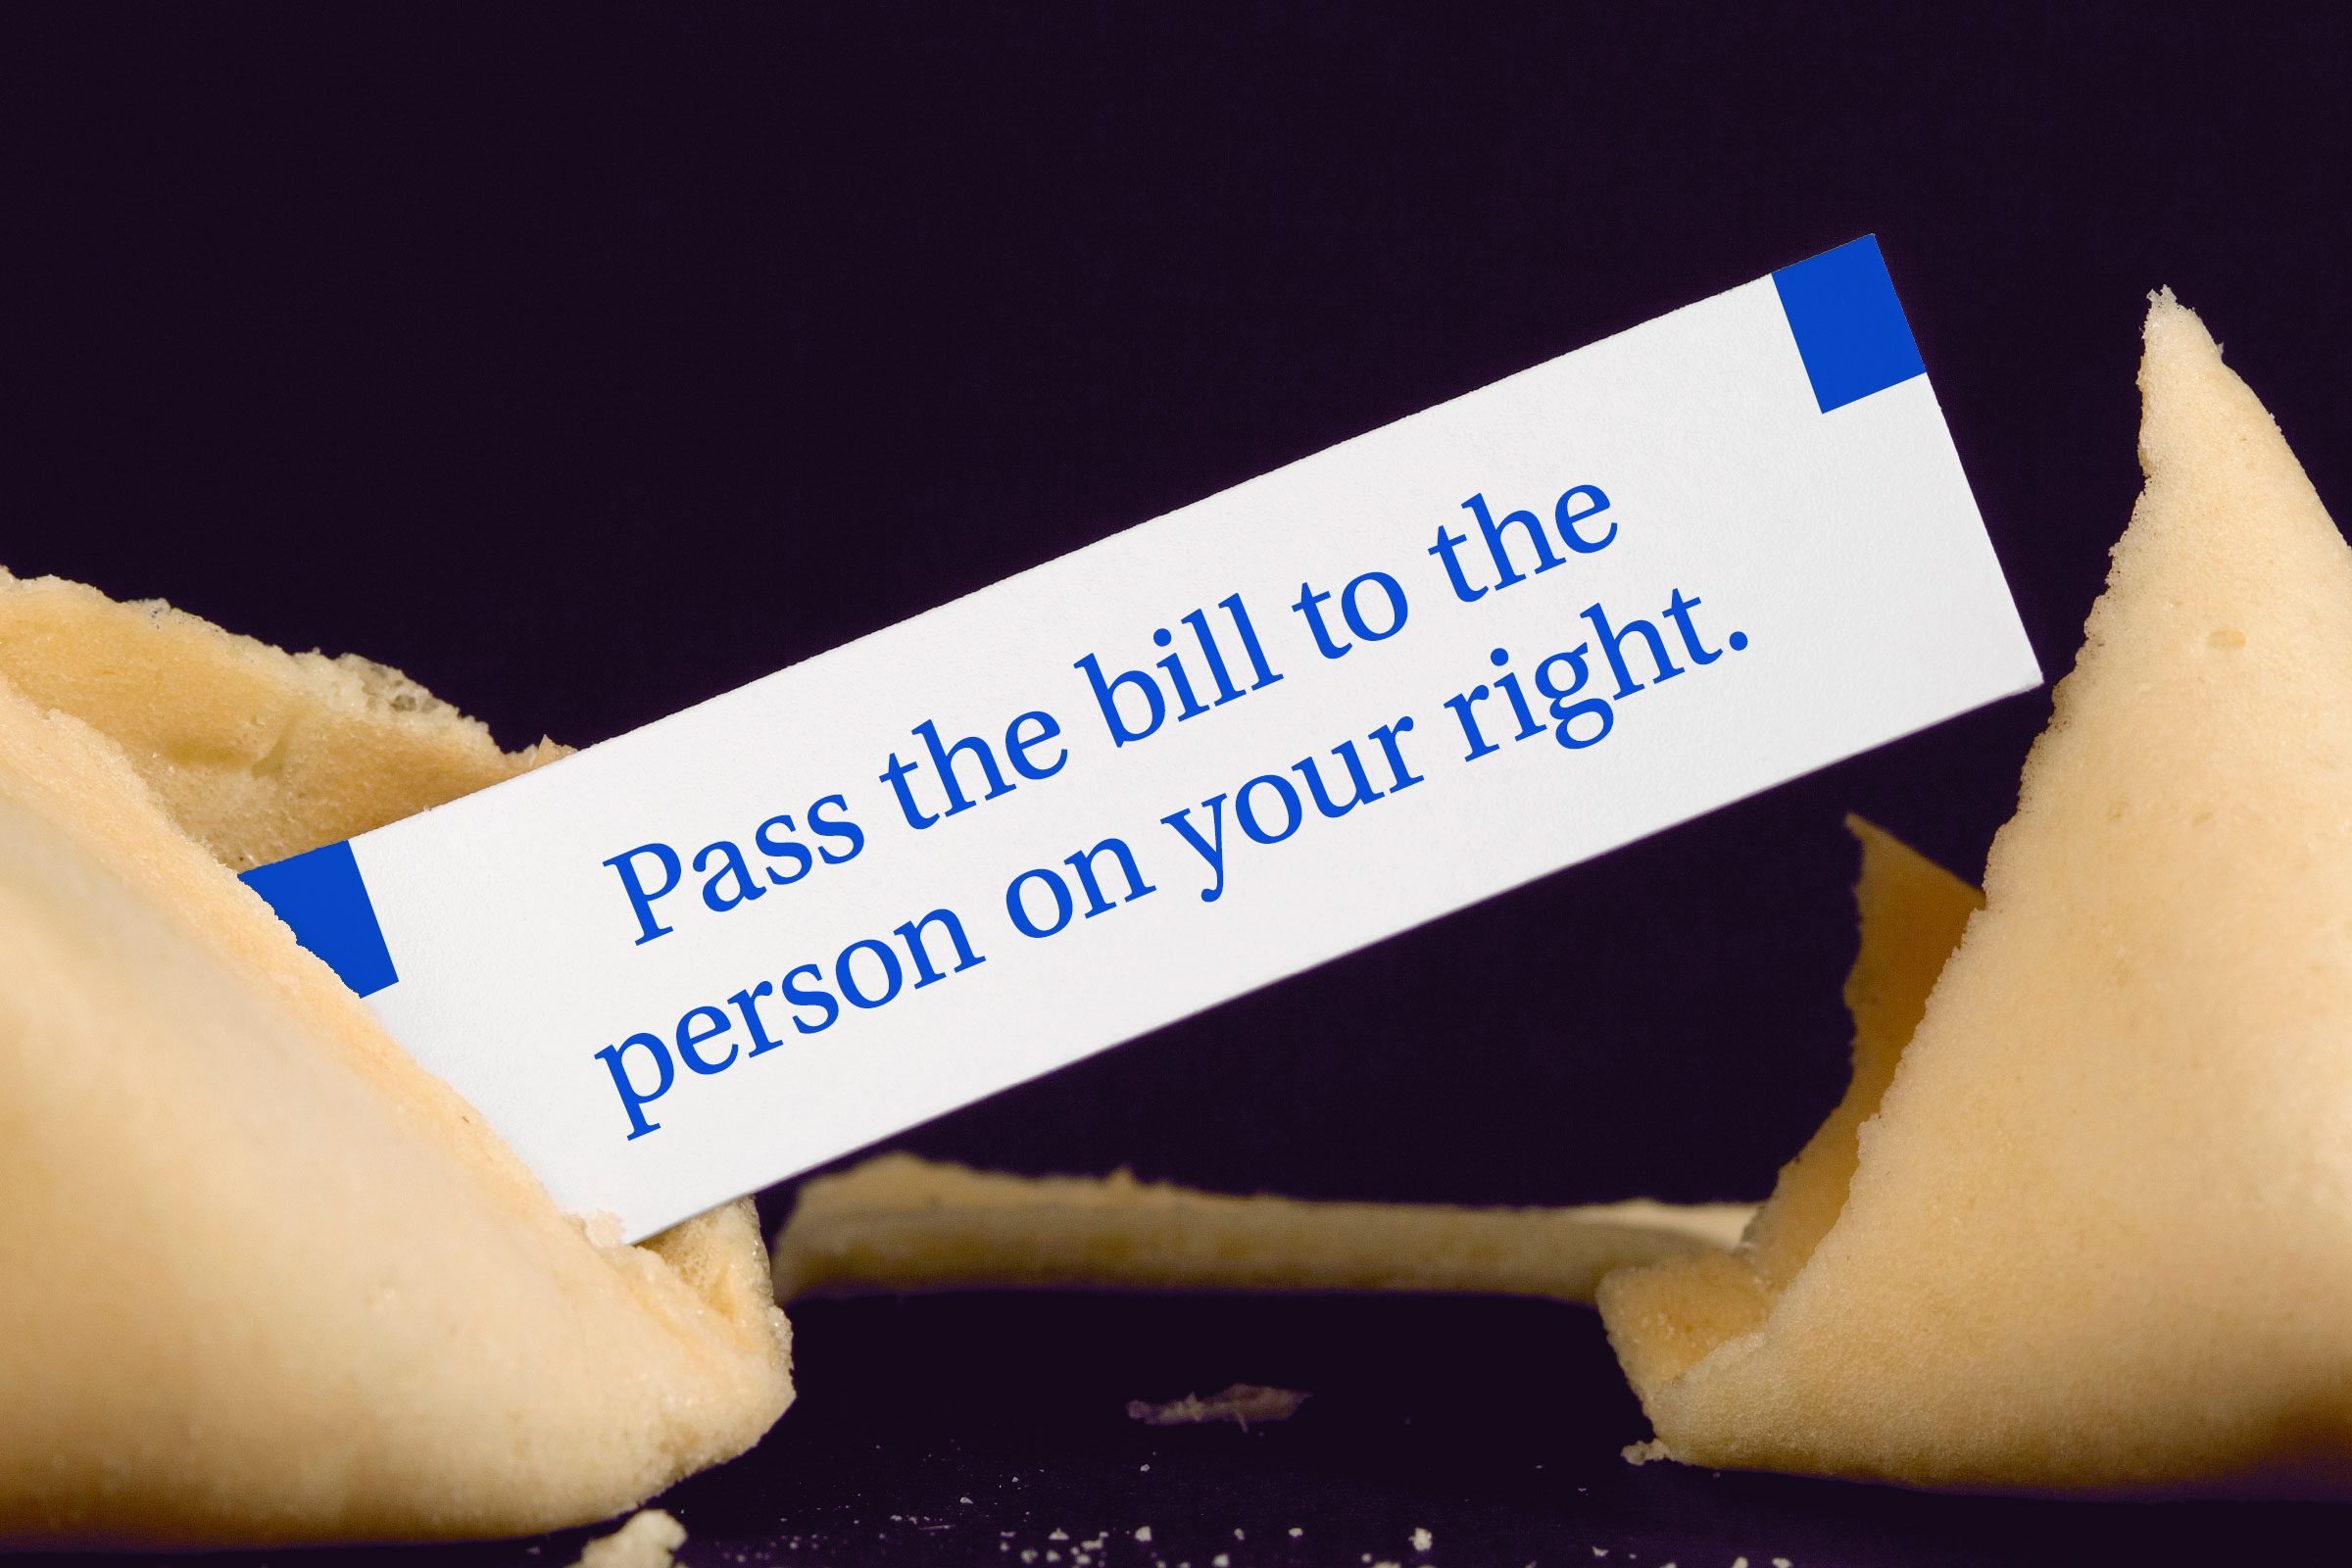 For image: Pass the bill to the person on your right.